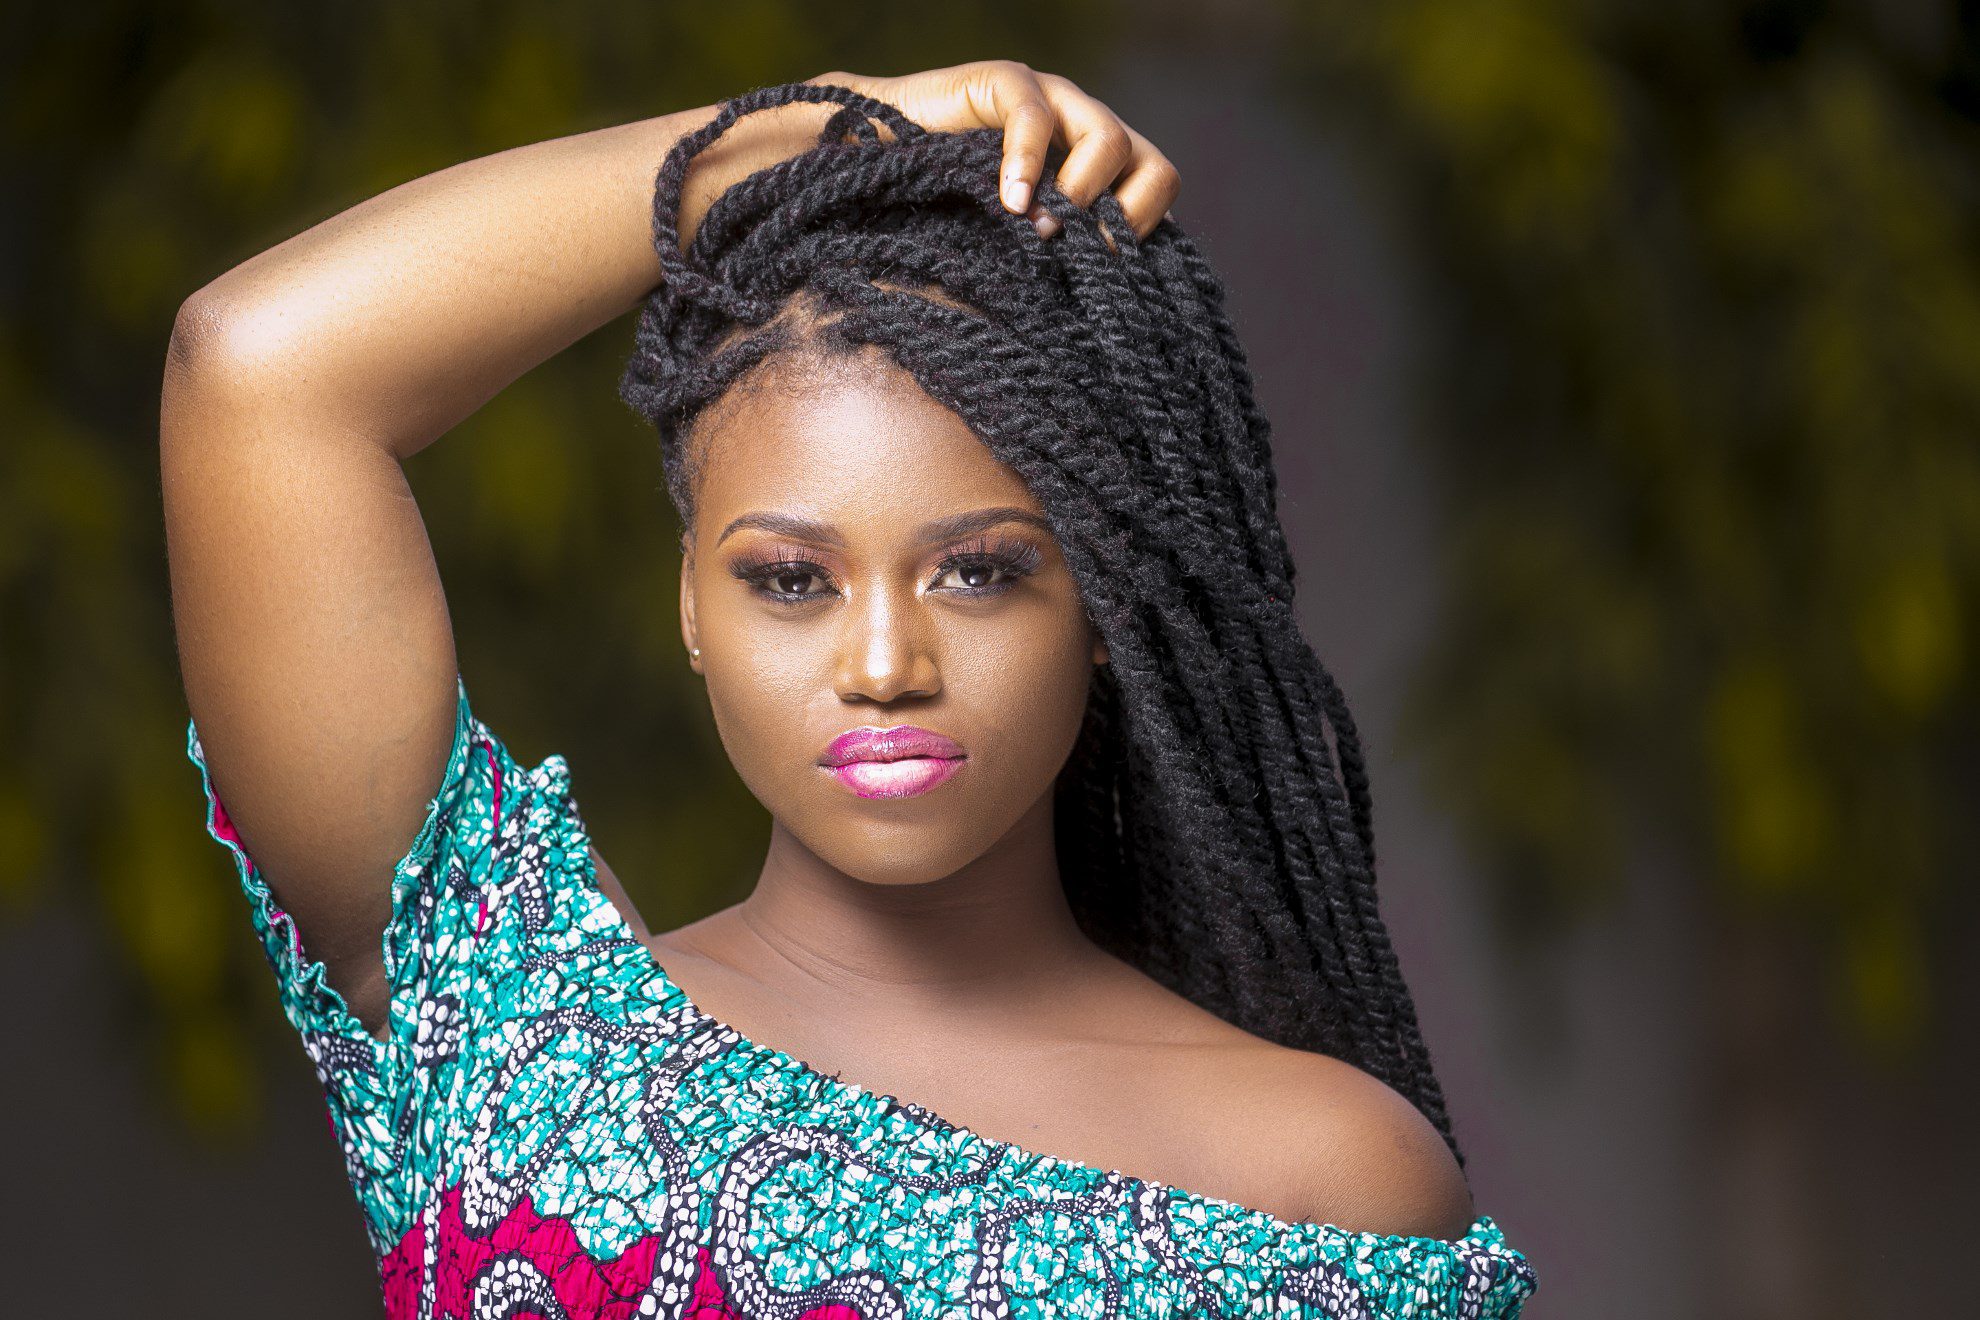 There are people in Ghana who are Stateless – eShun